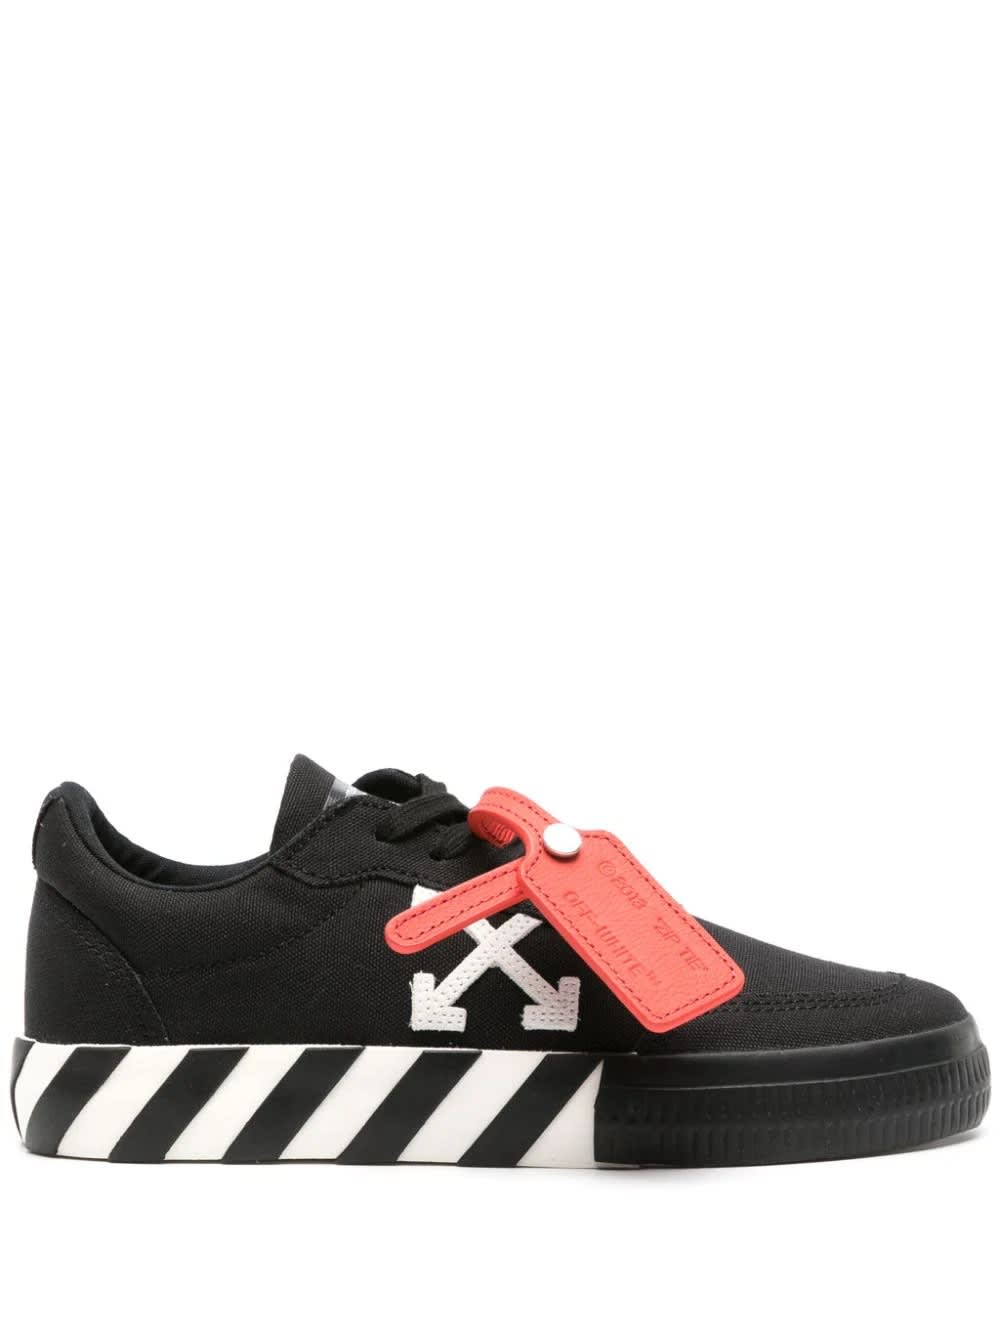 Off-white Black And White Vulcanized Low Sneakers